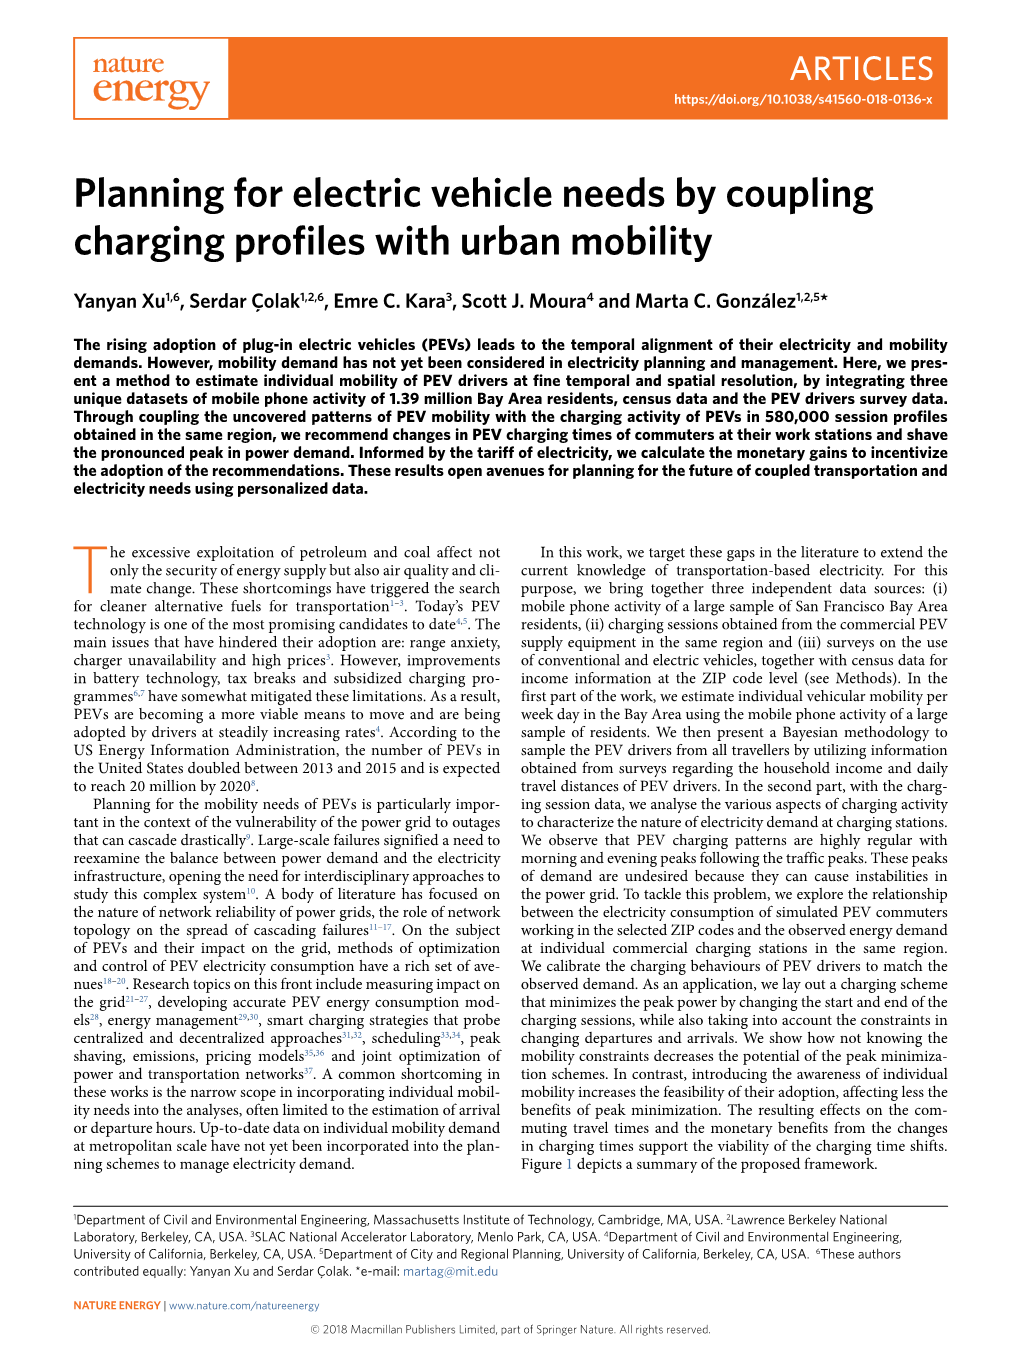 Planning for Electric Vehicle Needs by Coupling Charging Profiles with Urban Mobility